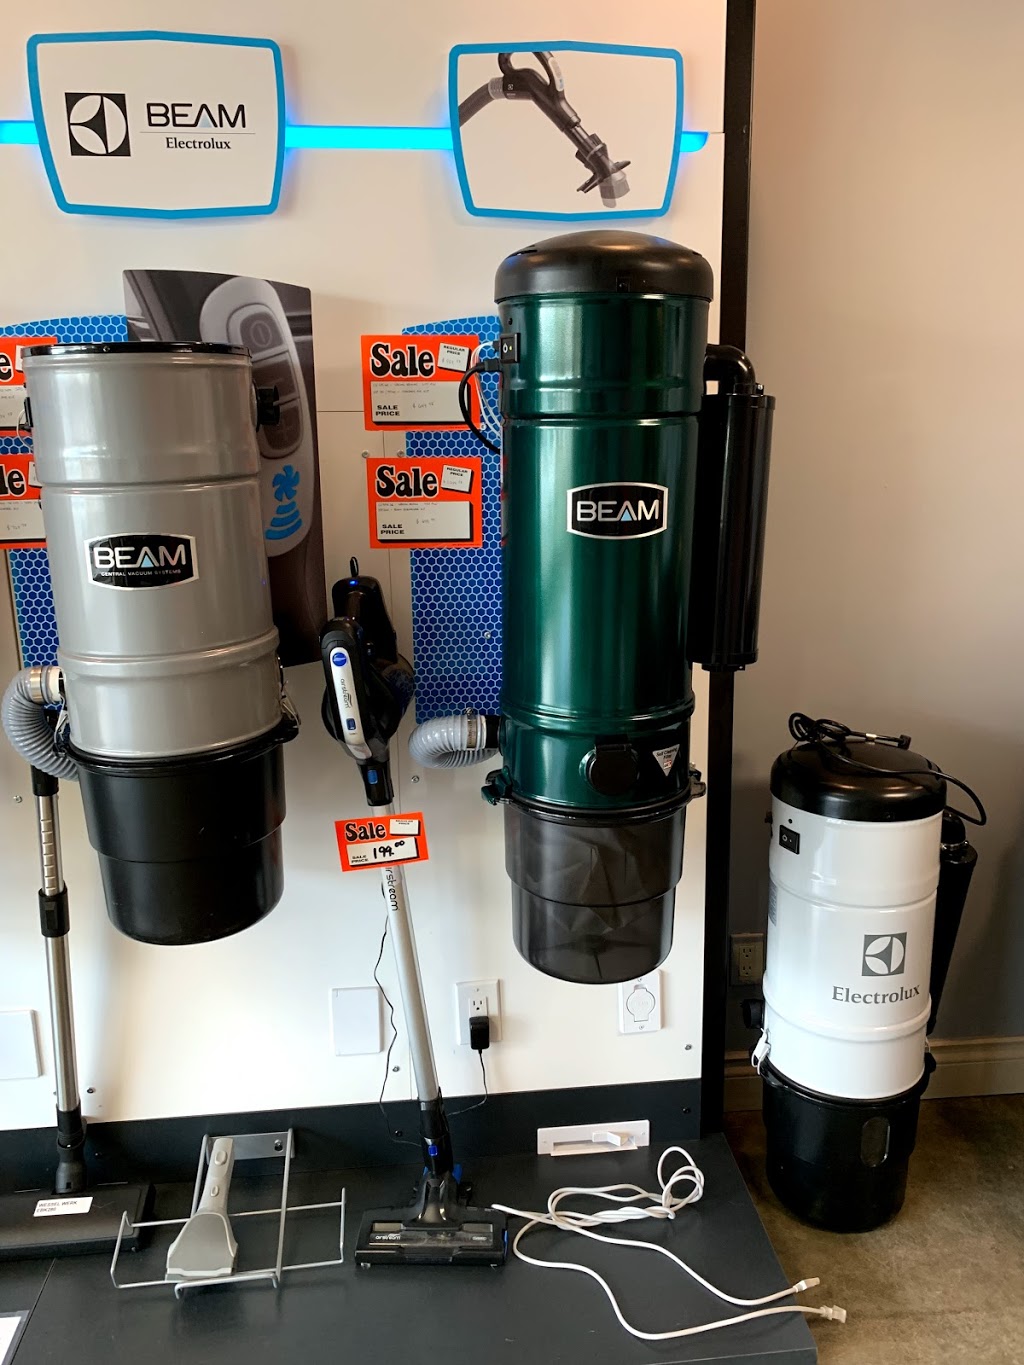 Beam Central Vacuum Systems | electronics store | 1743 Boundary Rd, Vancouver, BC V5M 3Y7, Canada | 6043247777 OR +1 604-324-7777